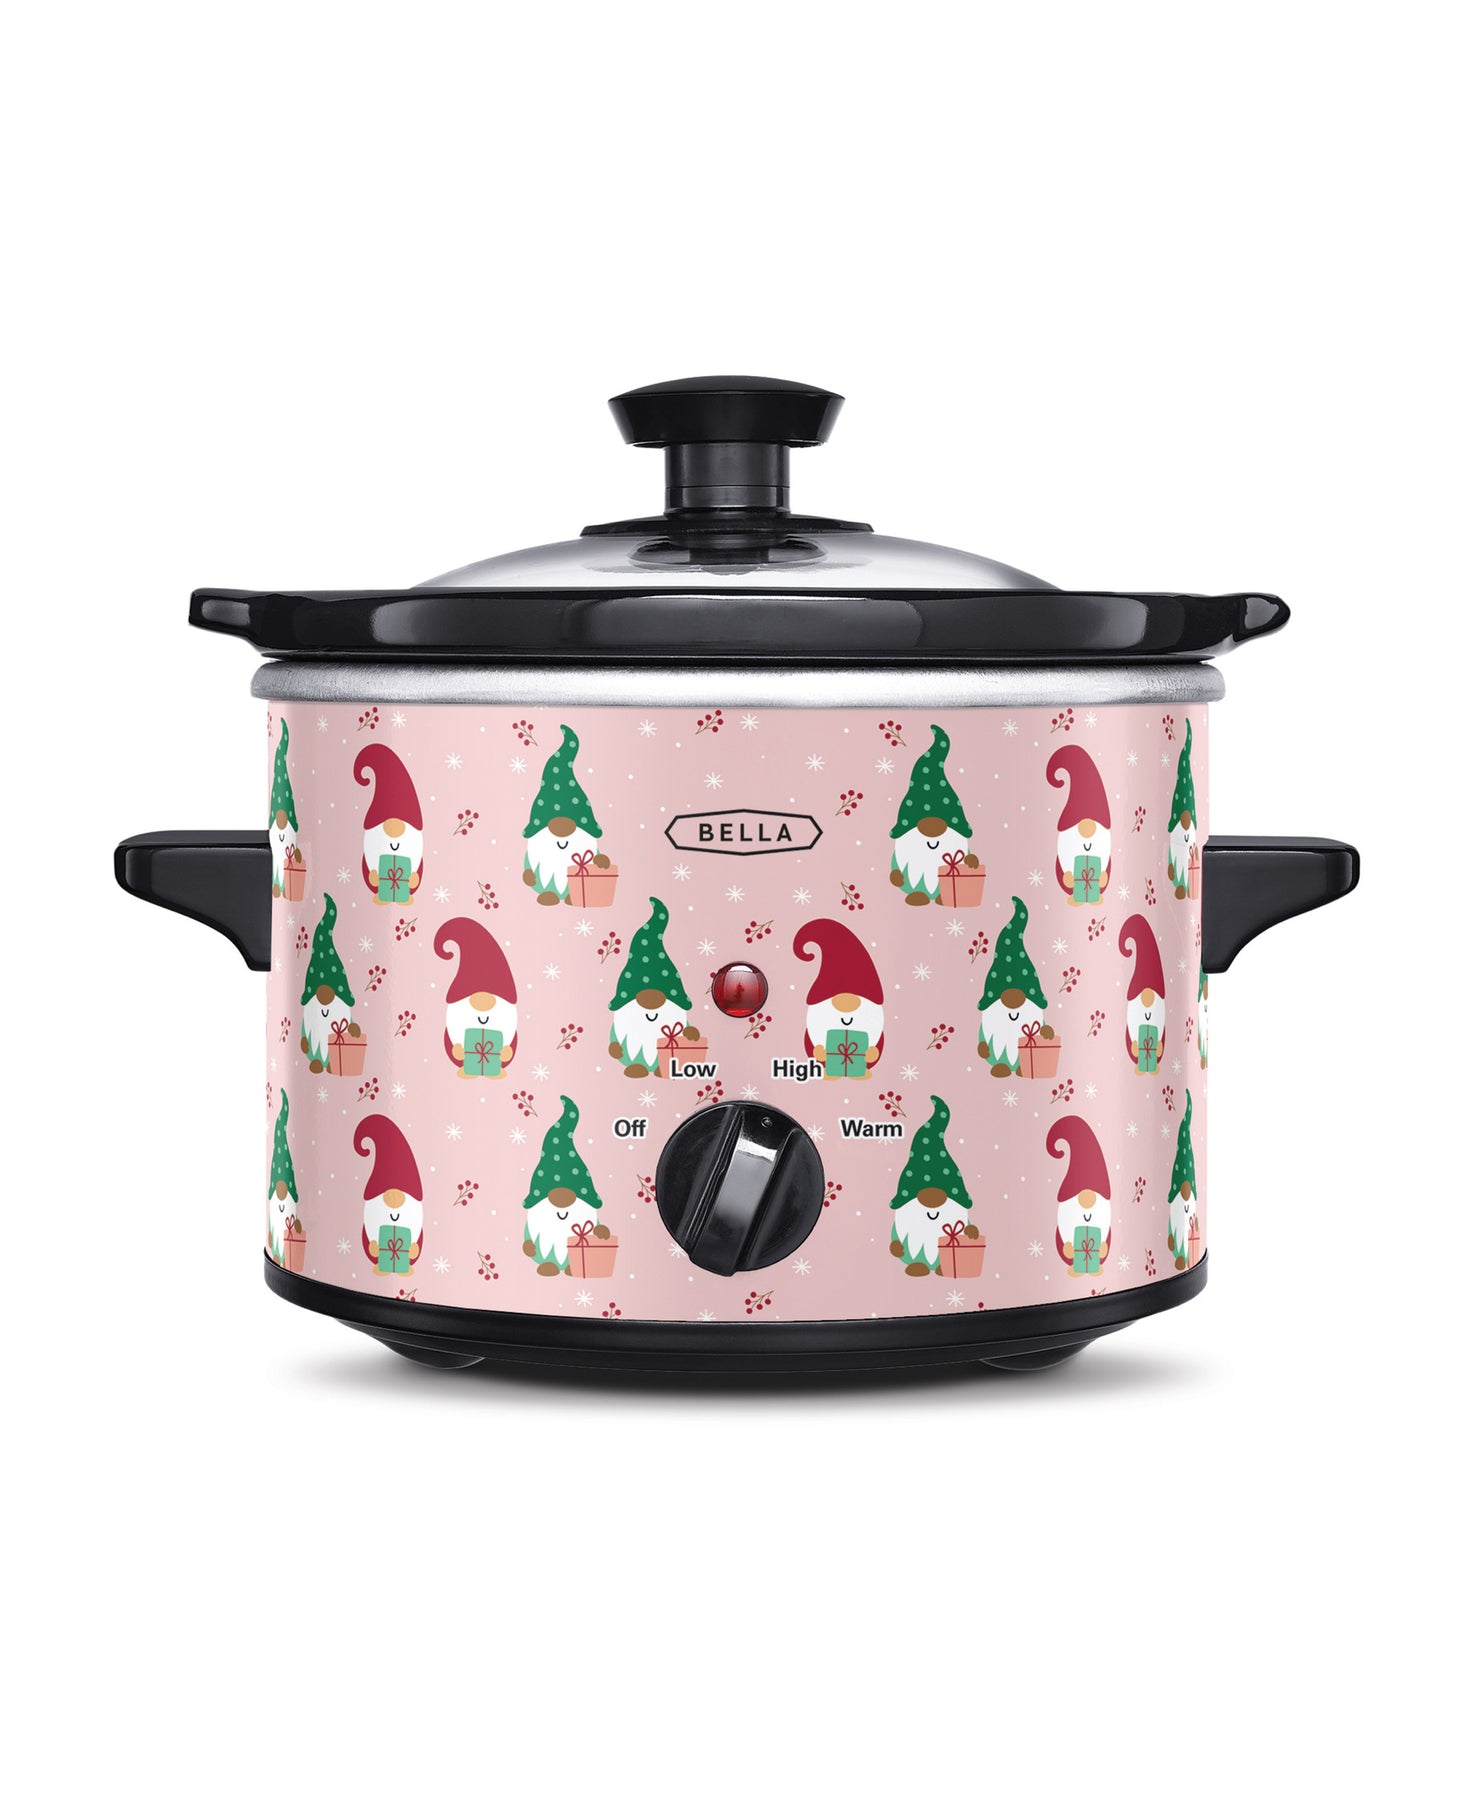 BELLA 13746 Dots Collection Slow Cooker, 6-Quart, Pink  Pink kitchen, Pink  kitchen appliances, Kitchen must haves